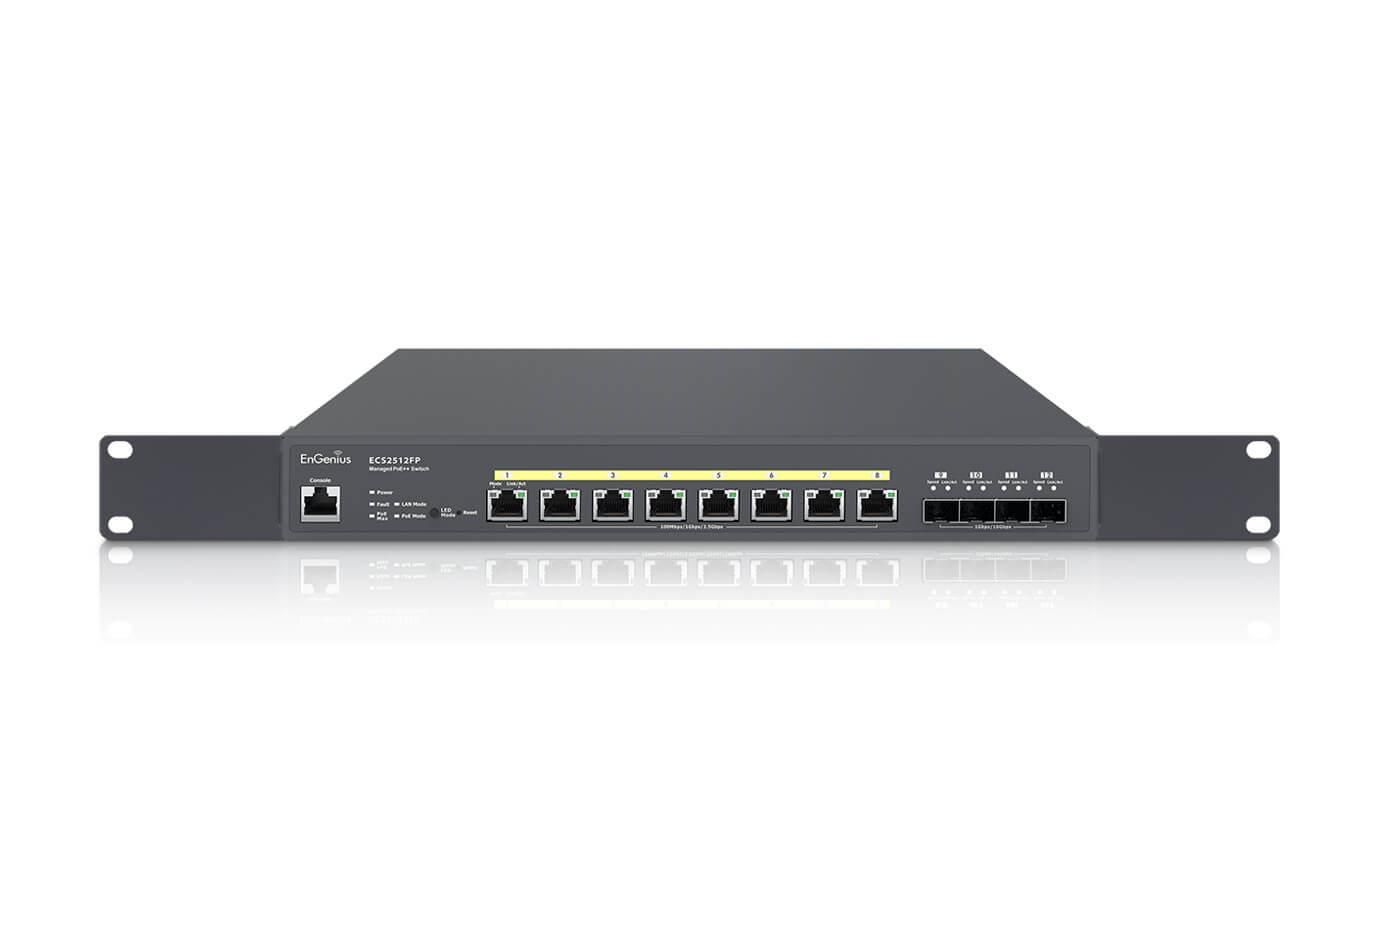 Engenius Cloud Managed Switch